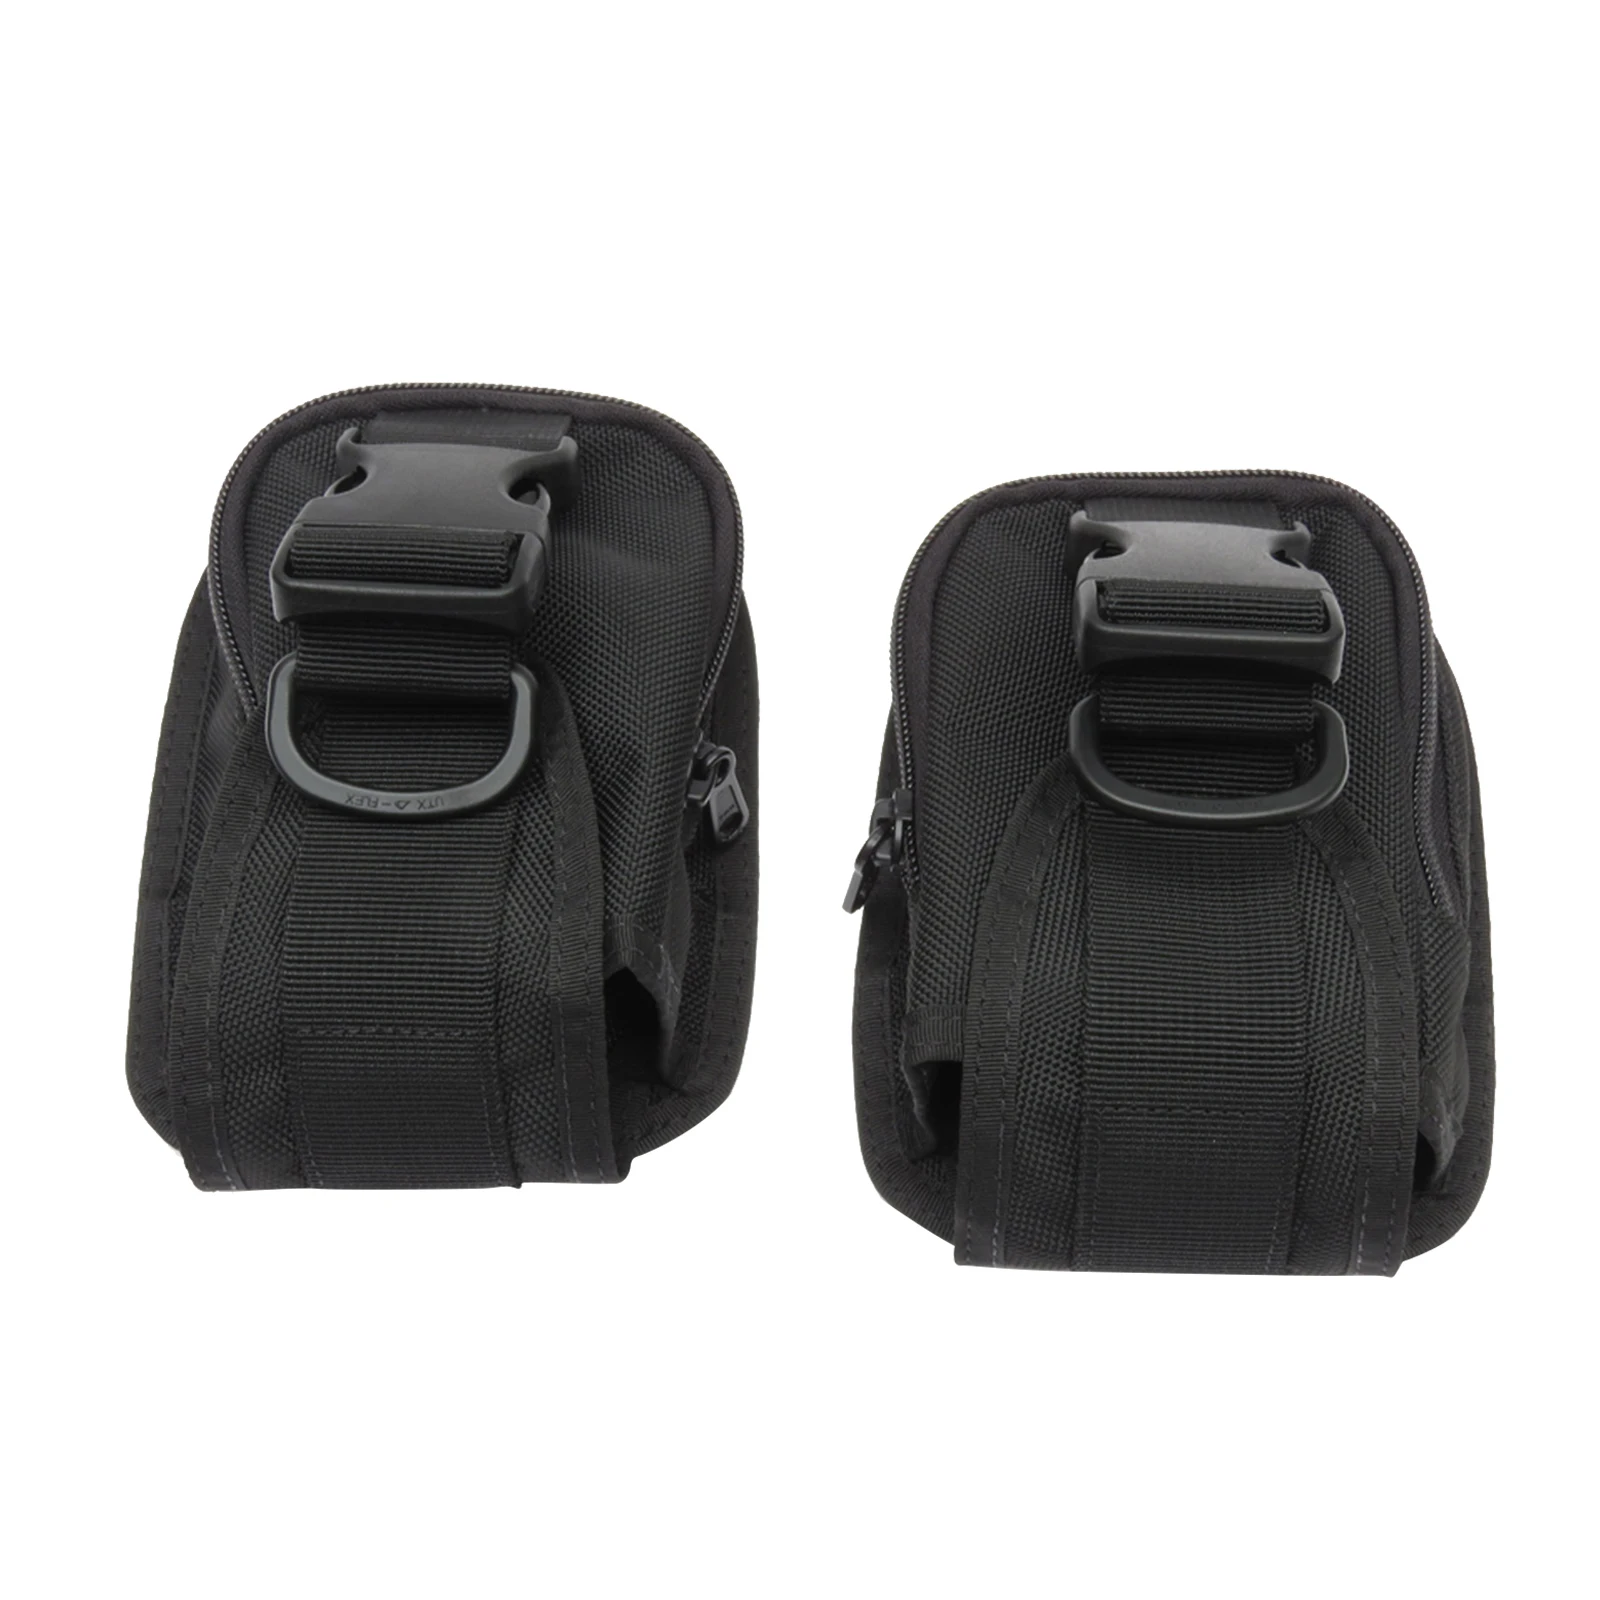 1 Pair Scuba Diving Trim Counter 2kg 5lbs Weight Pocket Pouch with Quick Release Buckles Straps, Weights Holder Carrier